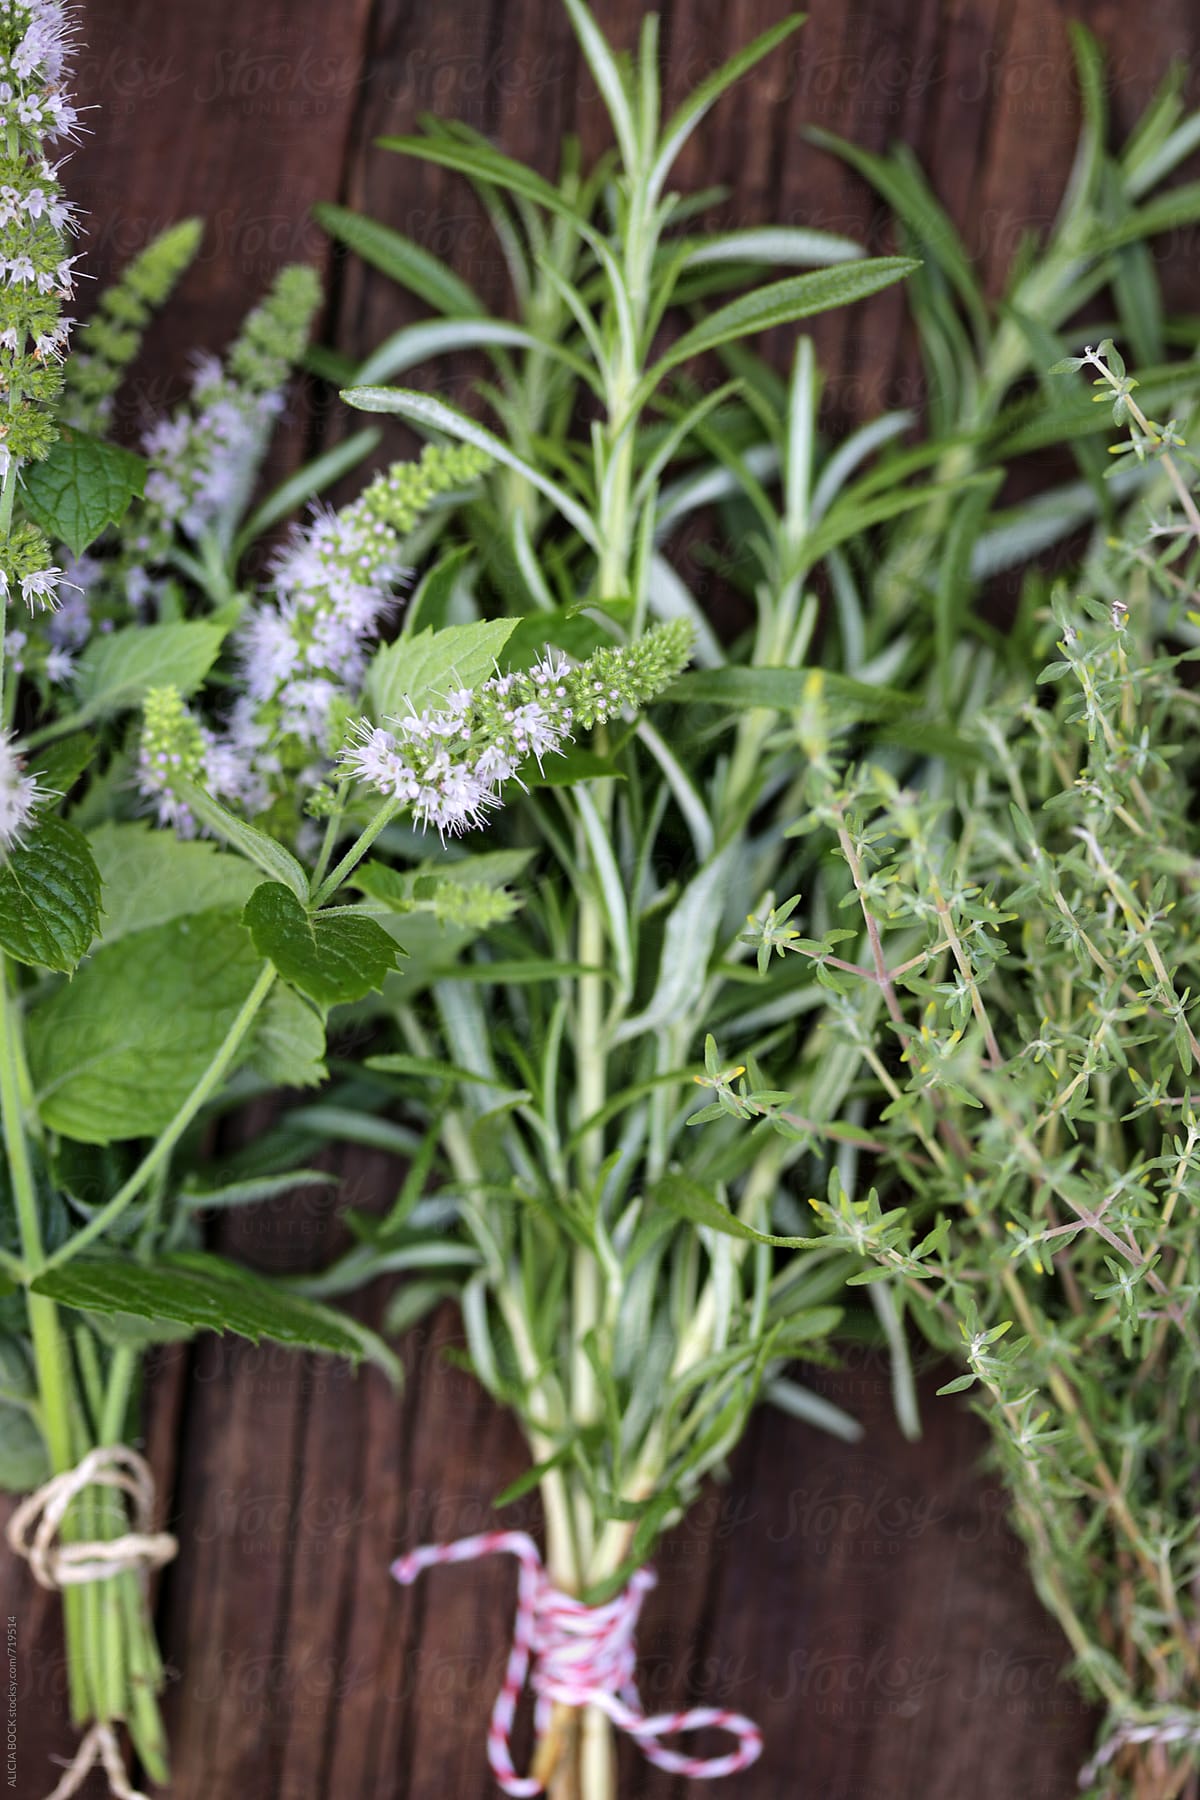 Bundles Of Fresh Herbs: Rosemary, Mint And Thyme